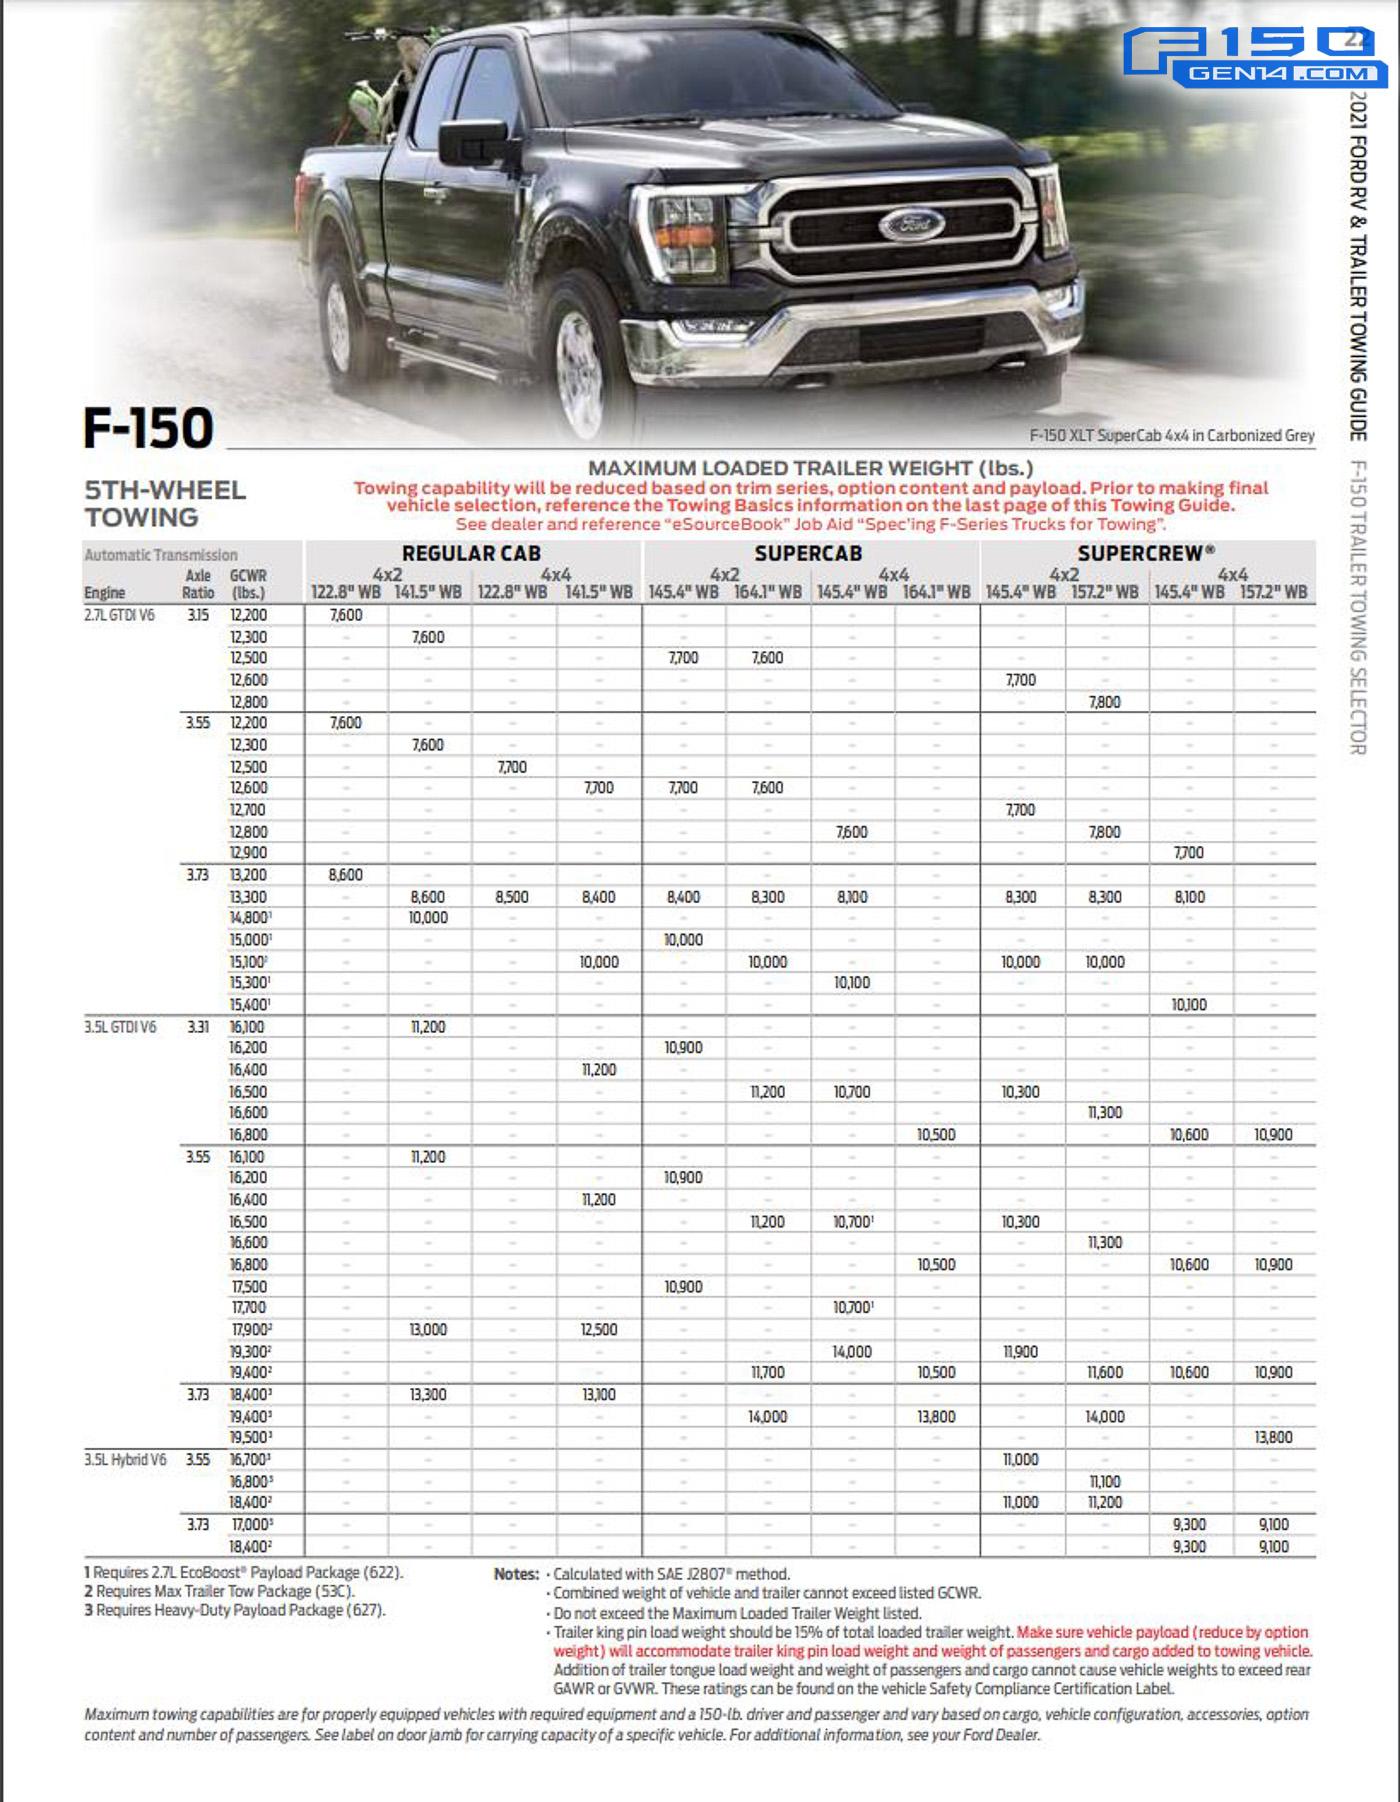 Ford F-150 Lightning 2021 F-150 Towing, 5th Wheel Towing and Cargo / Payload Capacity Figures 2021-F-150-Towing-Payload-Capacity-Guide-09